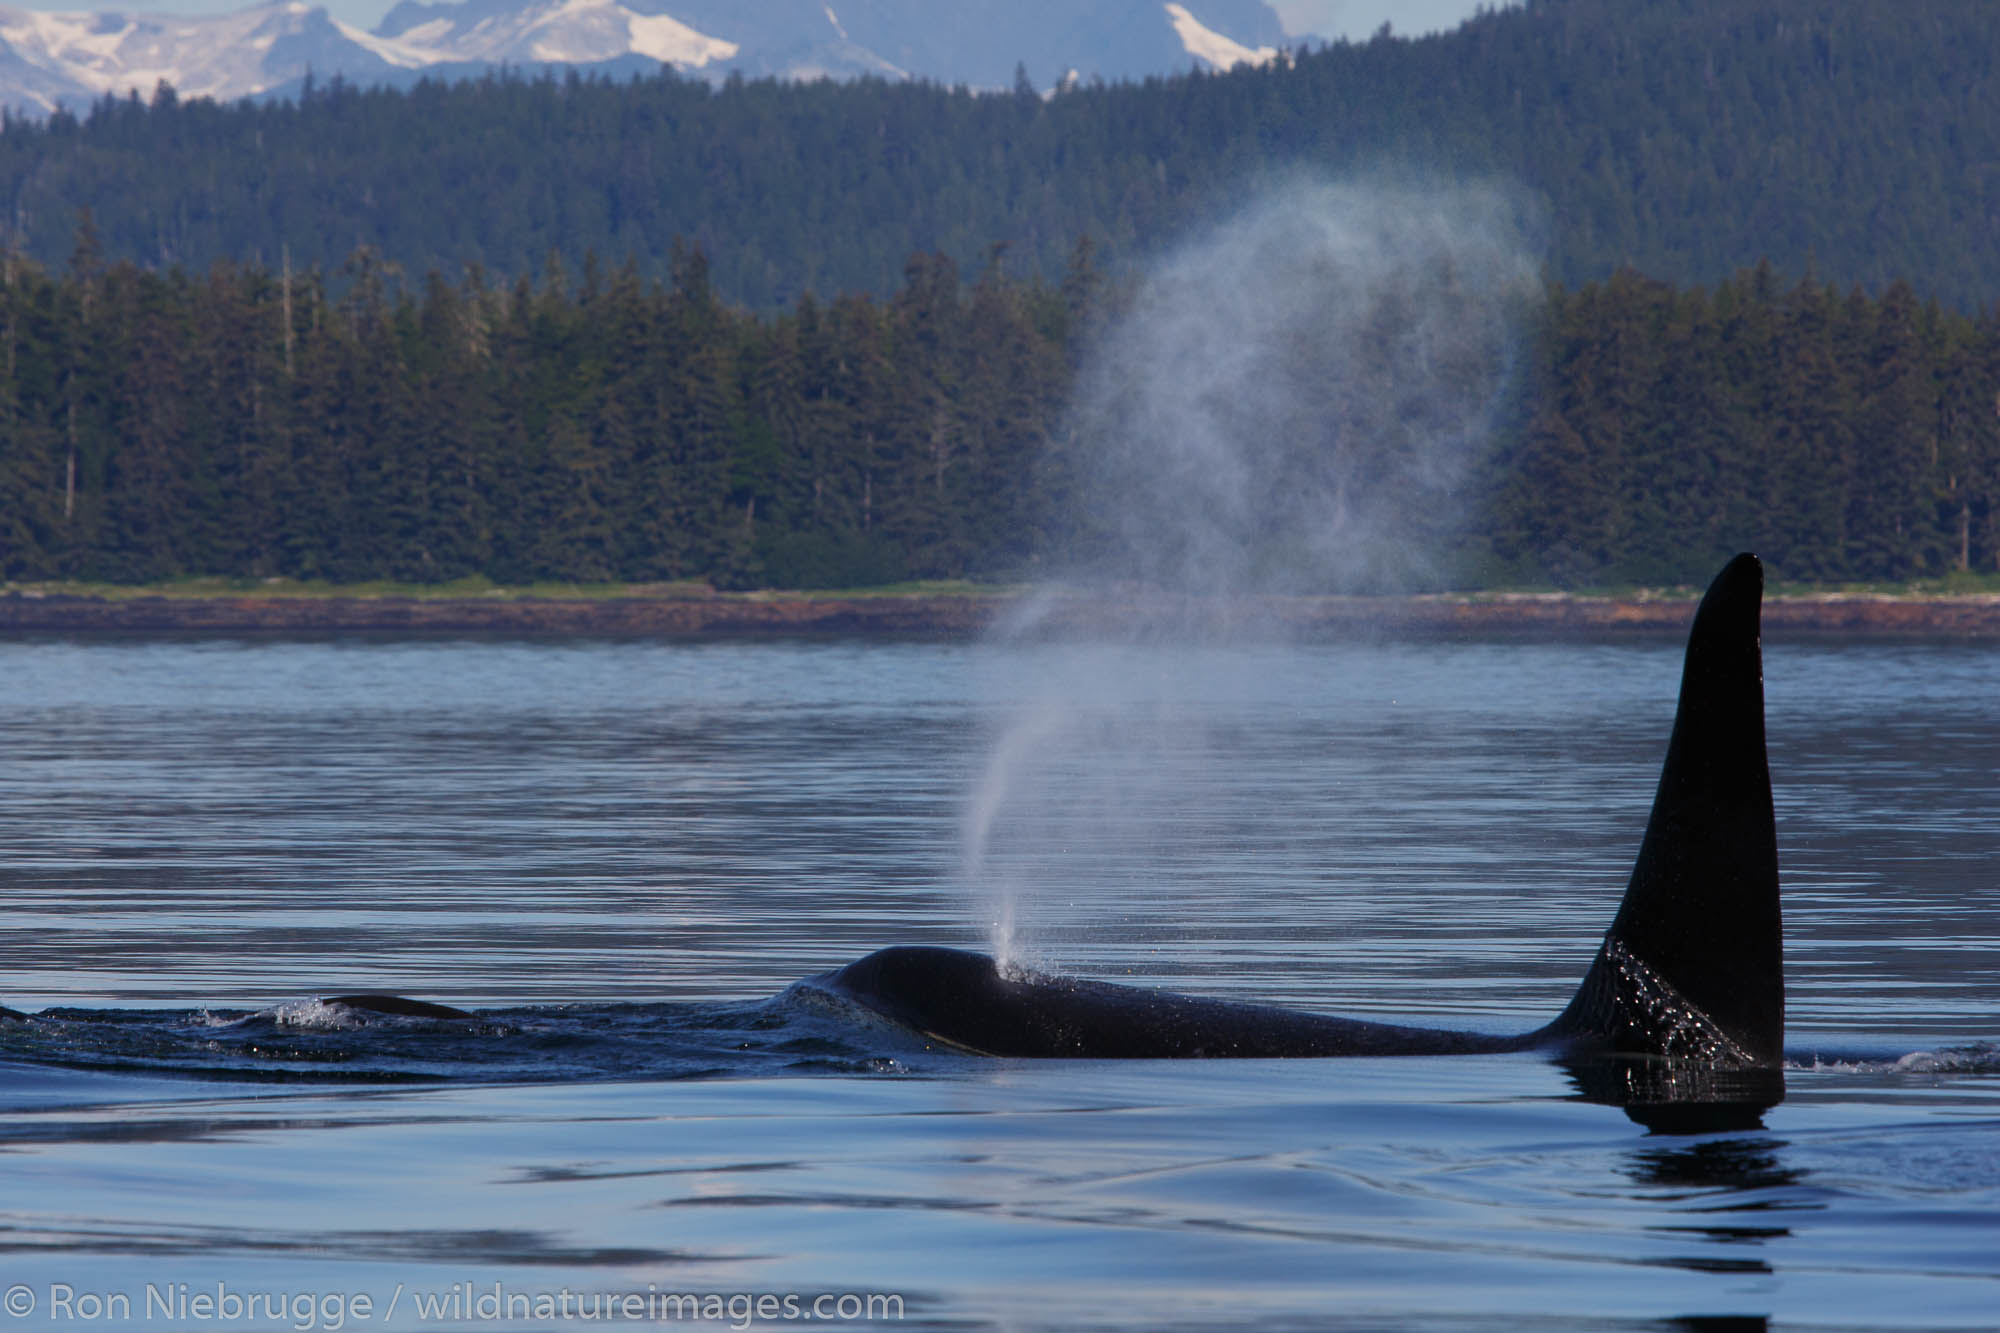 Orcas from the AF5 pod, Frederick Sound, Tongass National Forest, Alaska.